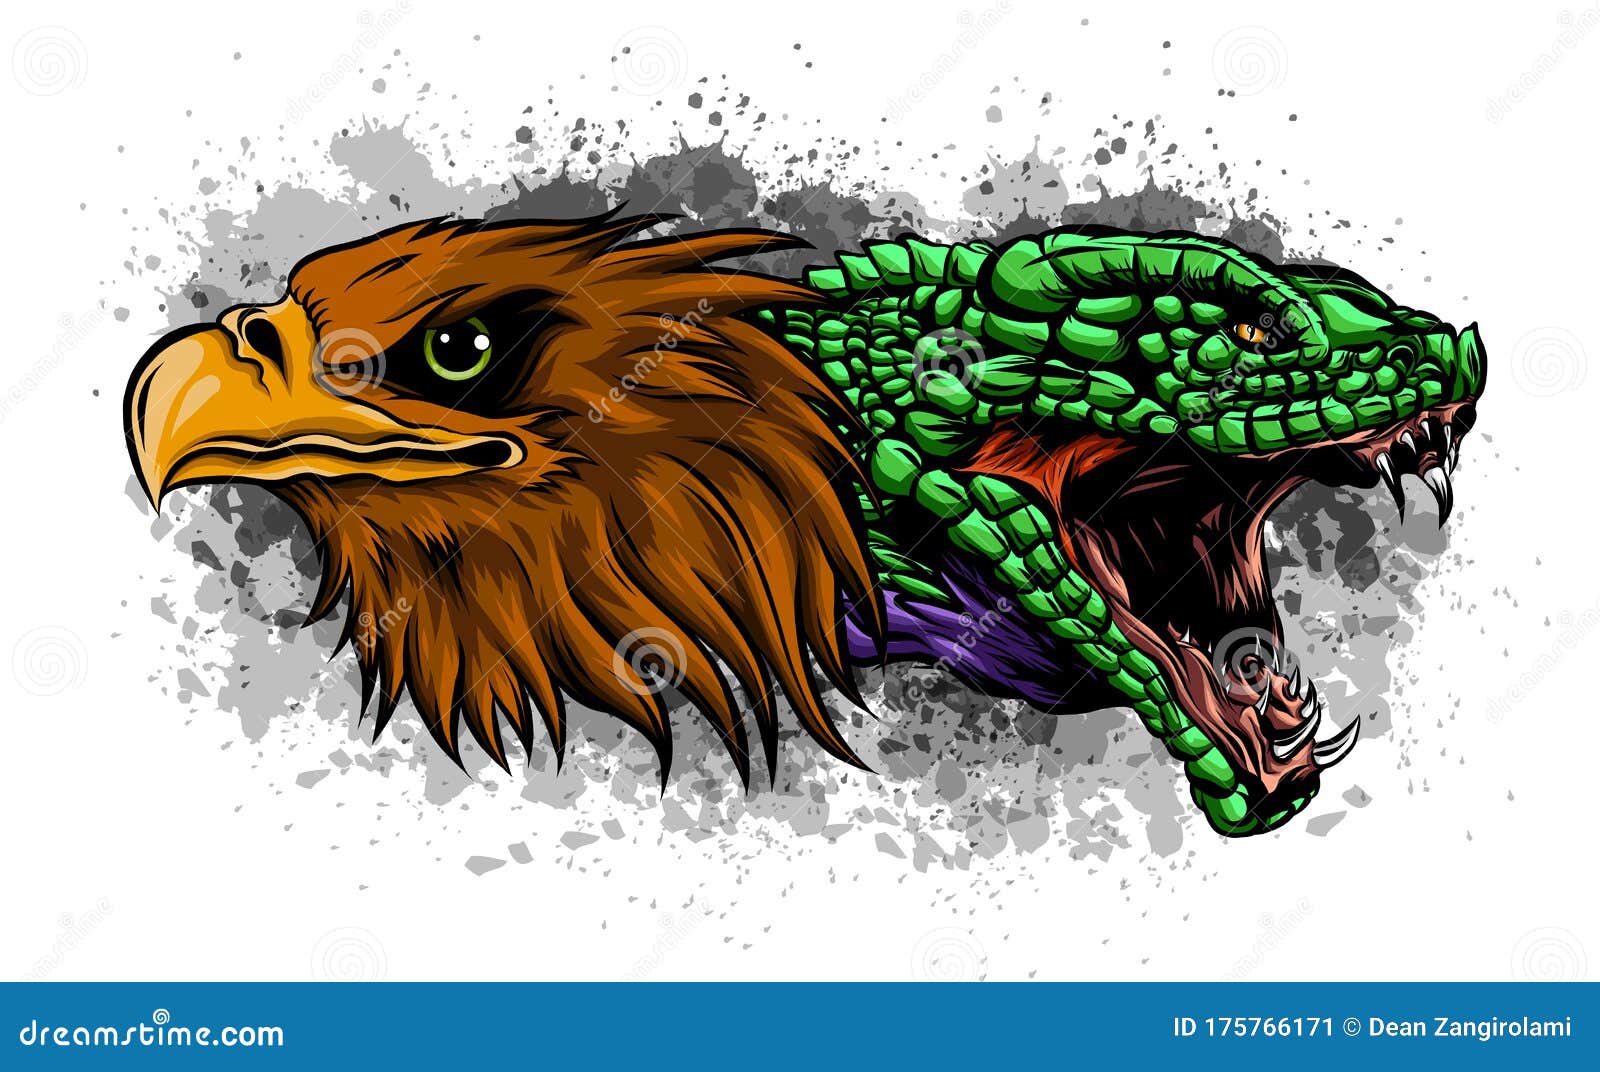 Traditional Bald Eagle Fighting Snake Tattoo Sticker for Sale by Cesar  Caligula  Redbubble